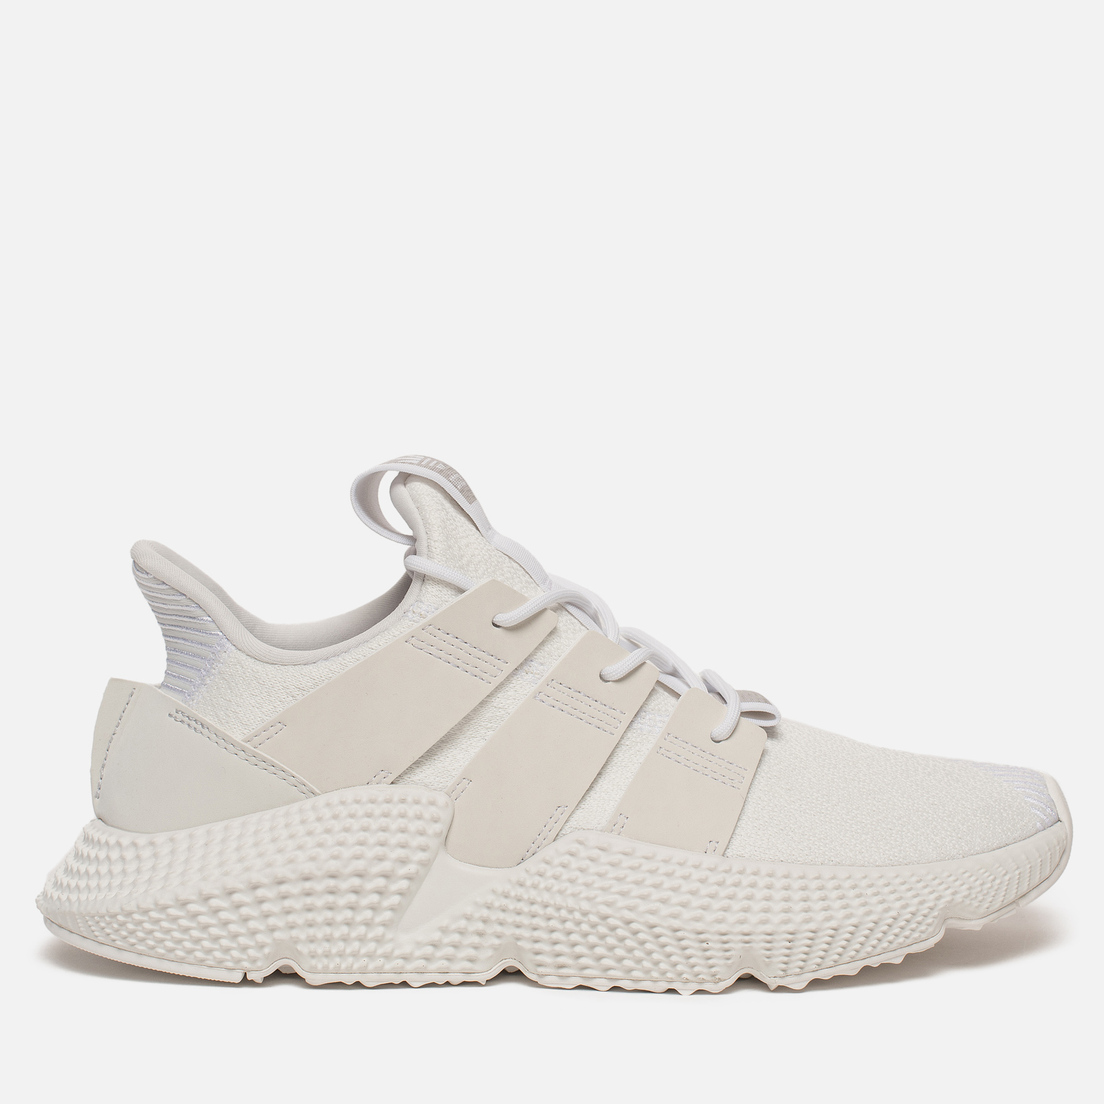 adidas prophere crystal white